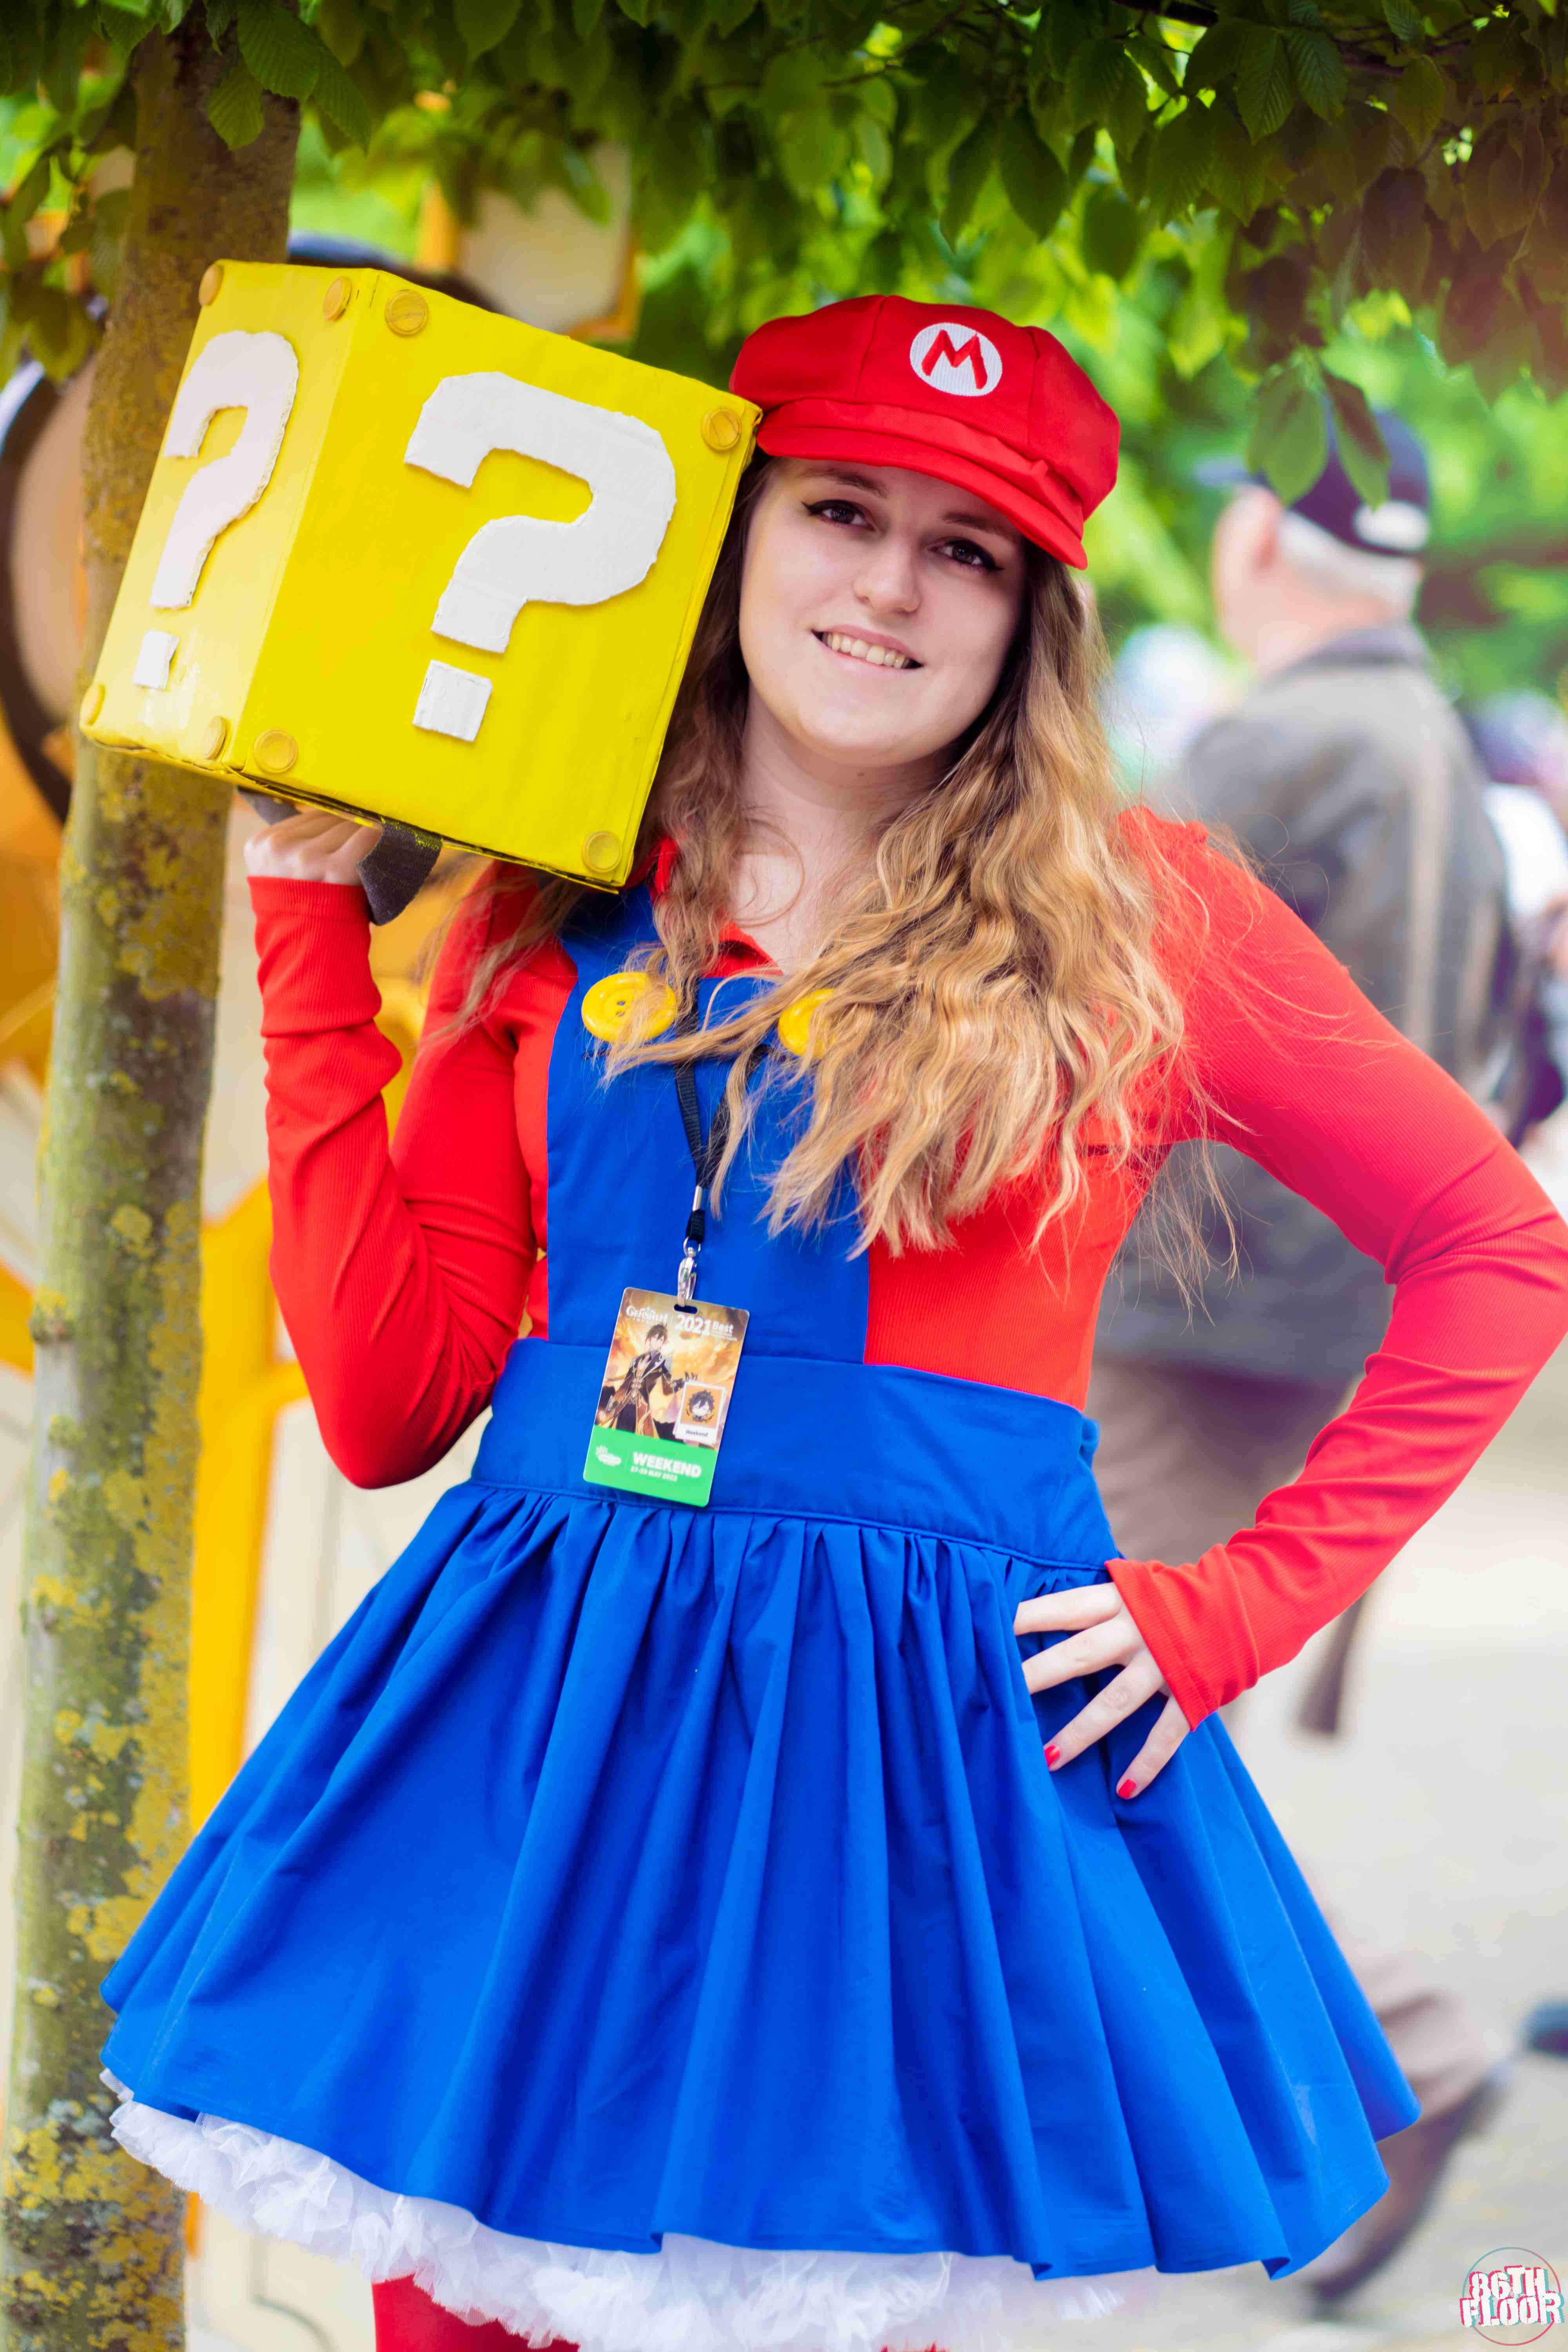 Mario cosplayer from Super Mario from MCM London ComicCon May 2022